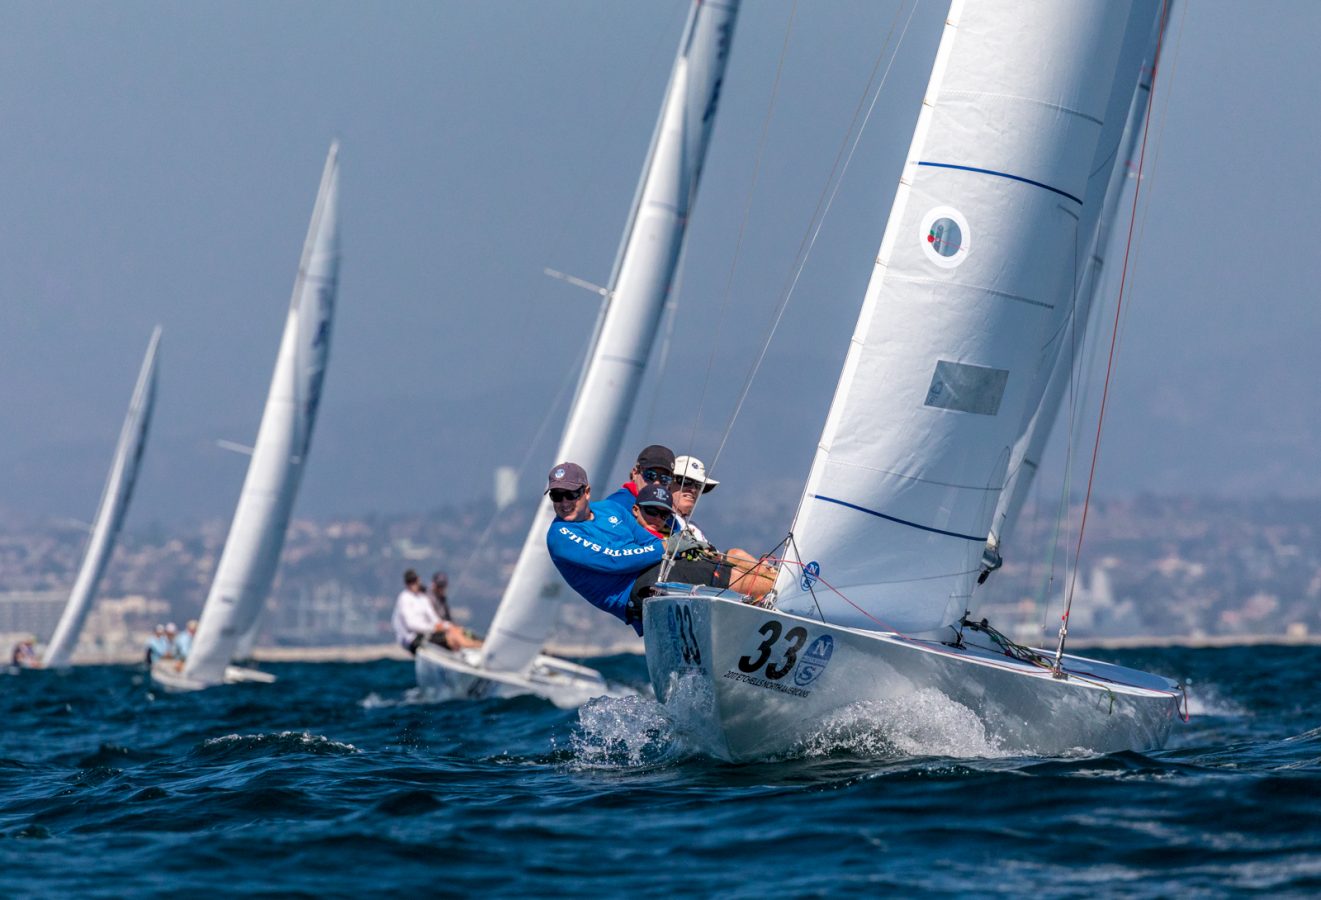 CONSISTENT GOOD STARTS - THE KEY AT THE ETCHELLS NORTH AMERICANS